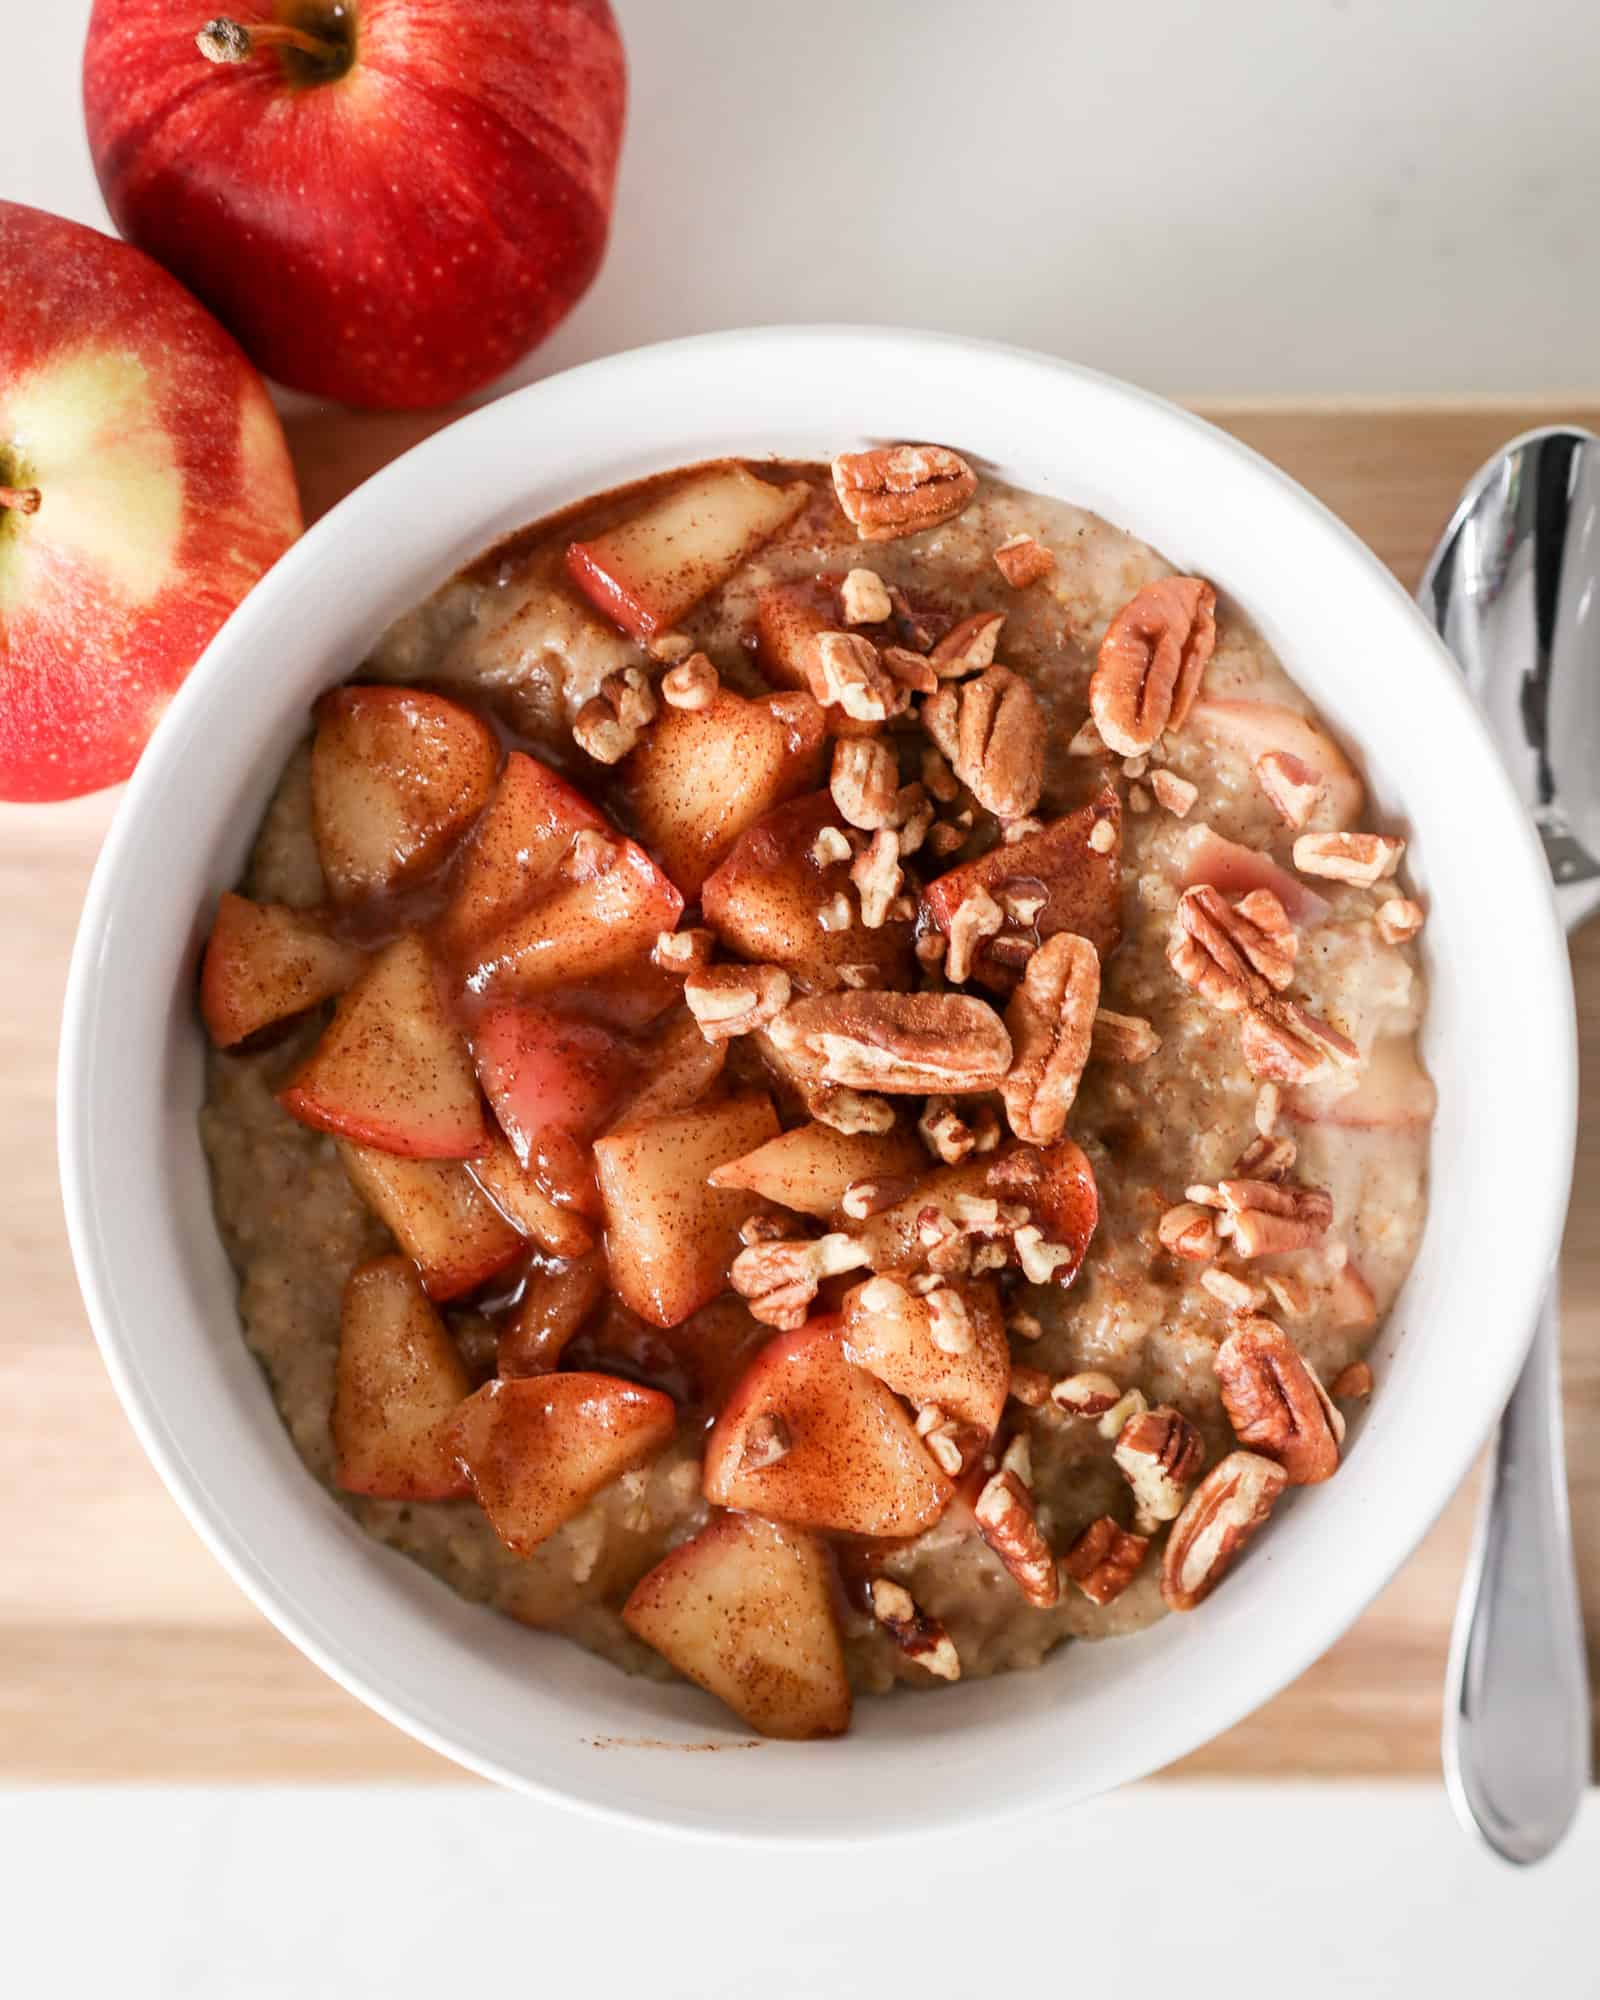 Apple Cinnamon Oatmeal topped with pecans in a white bowl